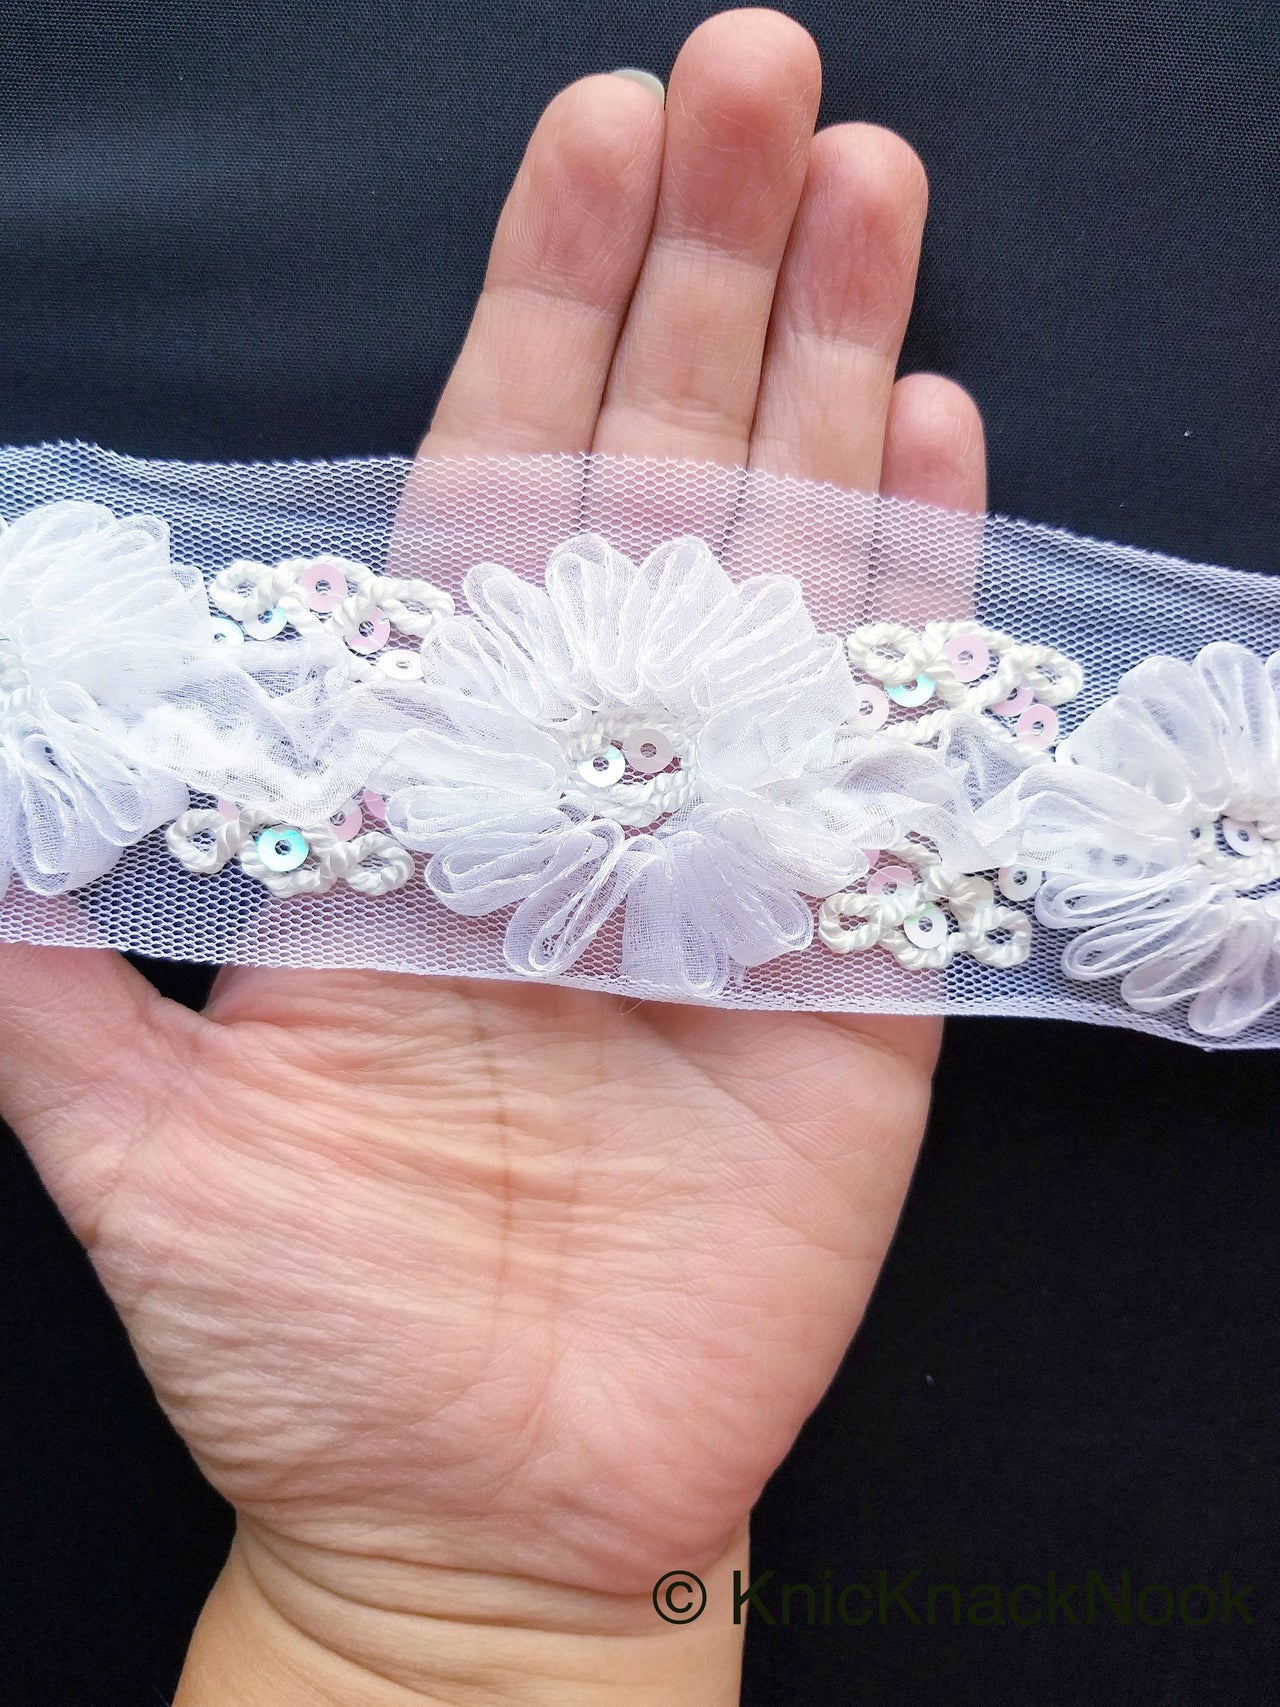 Wholesale White Flower Tissue Net Fabric Lace Trim With Sequins, Flora –  Knicknacknook